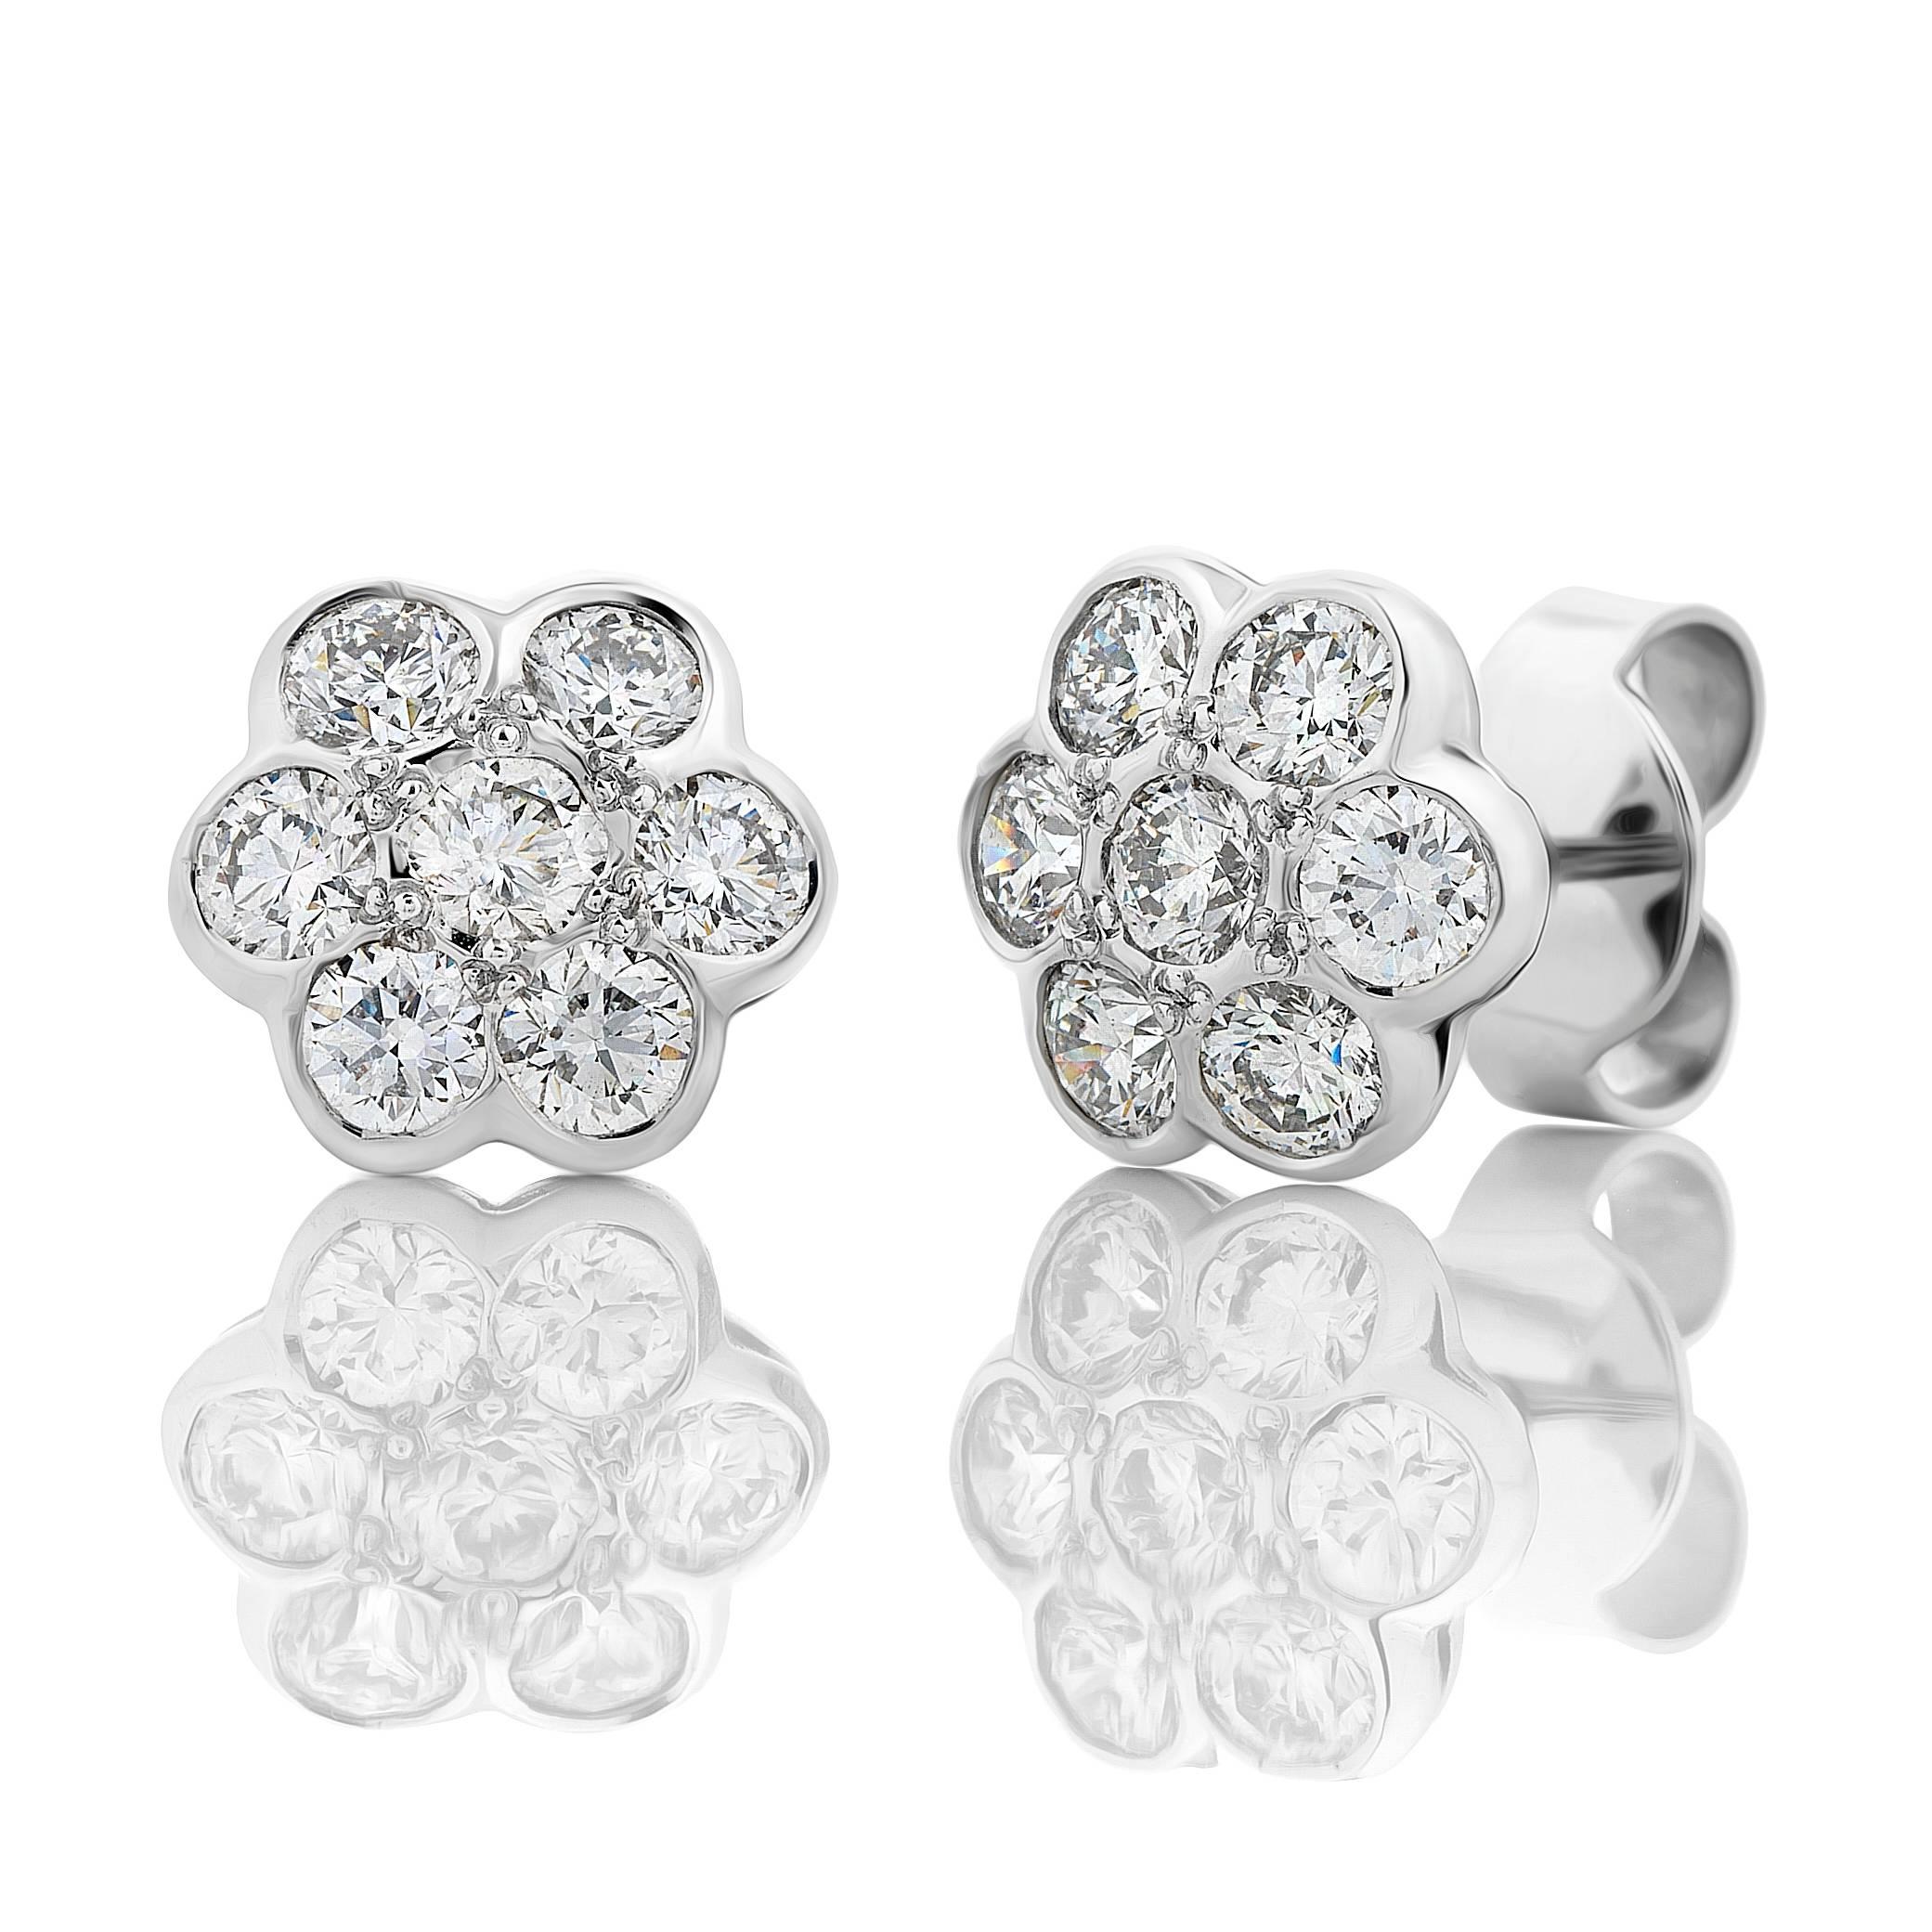 Each of these sweet studs is set with 7 x round brilliant diamonds.
Total diamond weight 14 = 1.74cts G/H Colour, Si1 Clarity.

The backs feature a saw pierced design leading to a post with large handmade butterfly backings

Diameter: